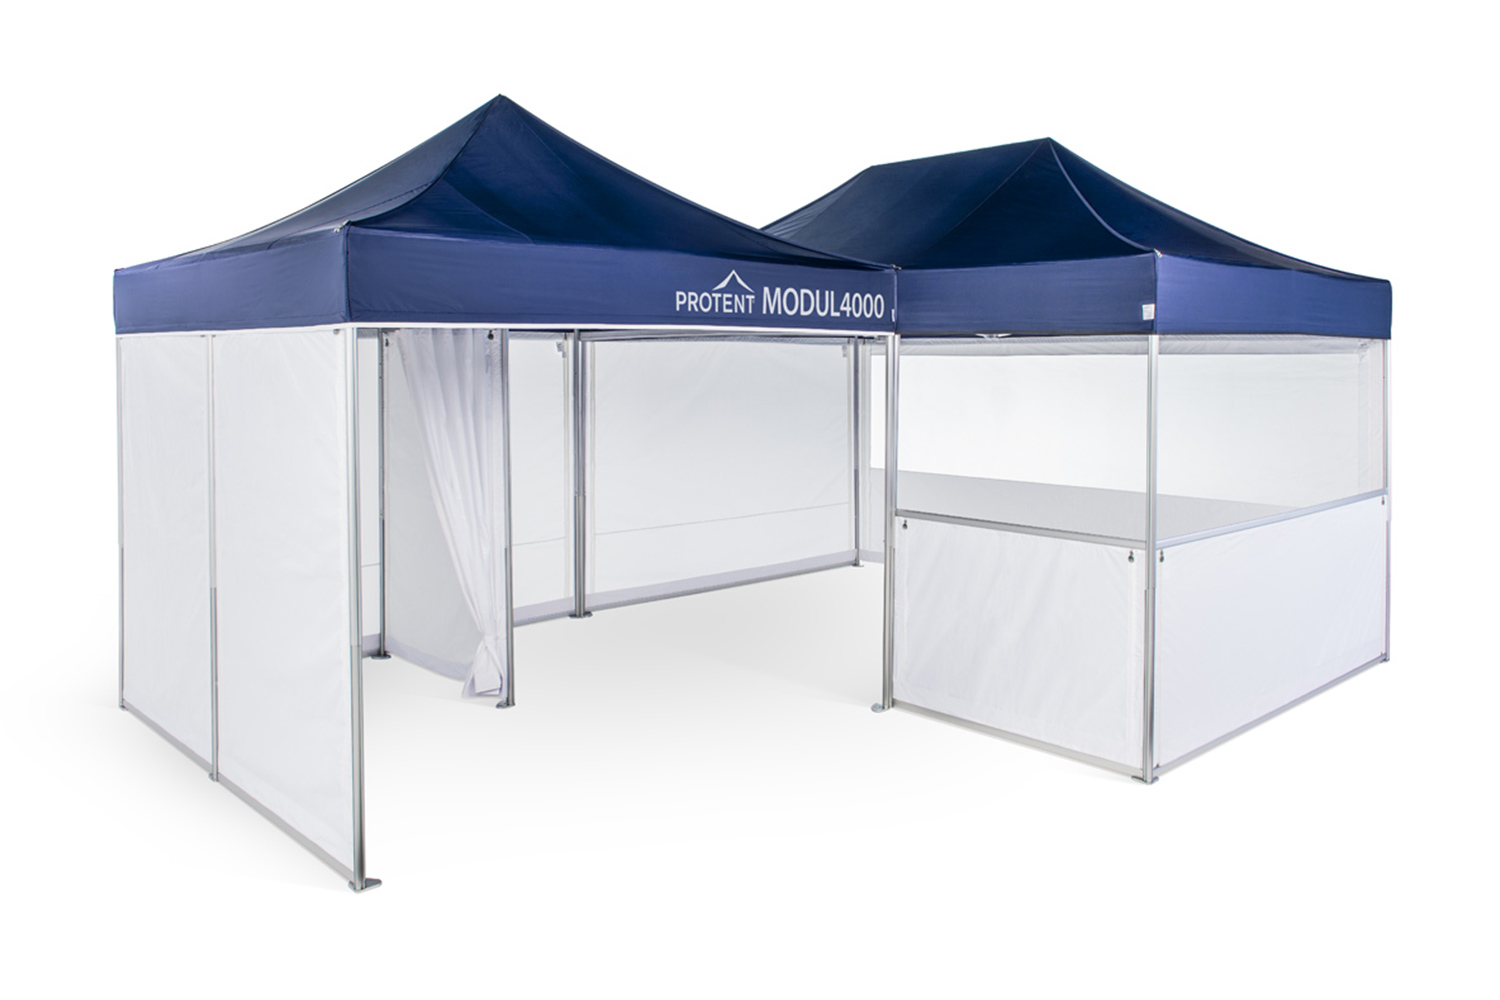 The folding tent modular system can be individually extended at any time